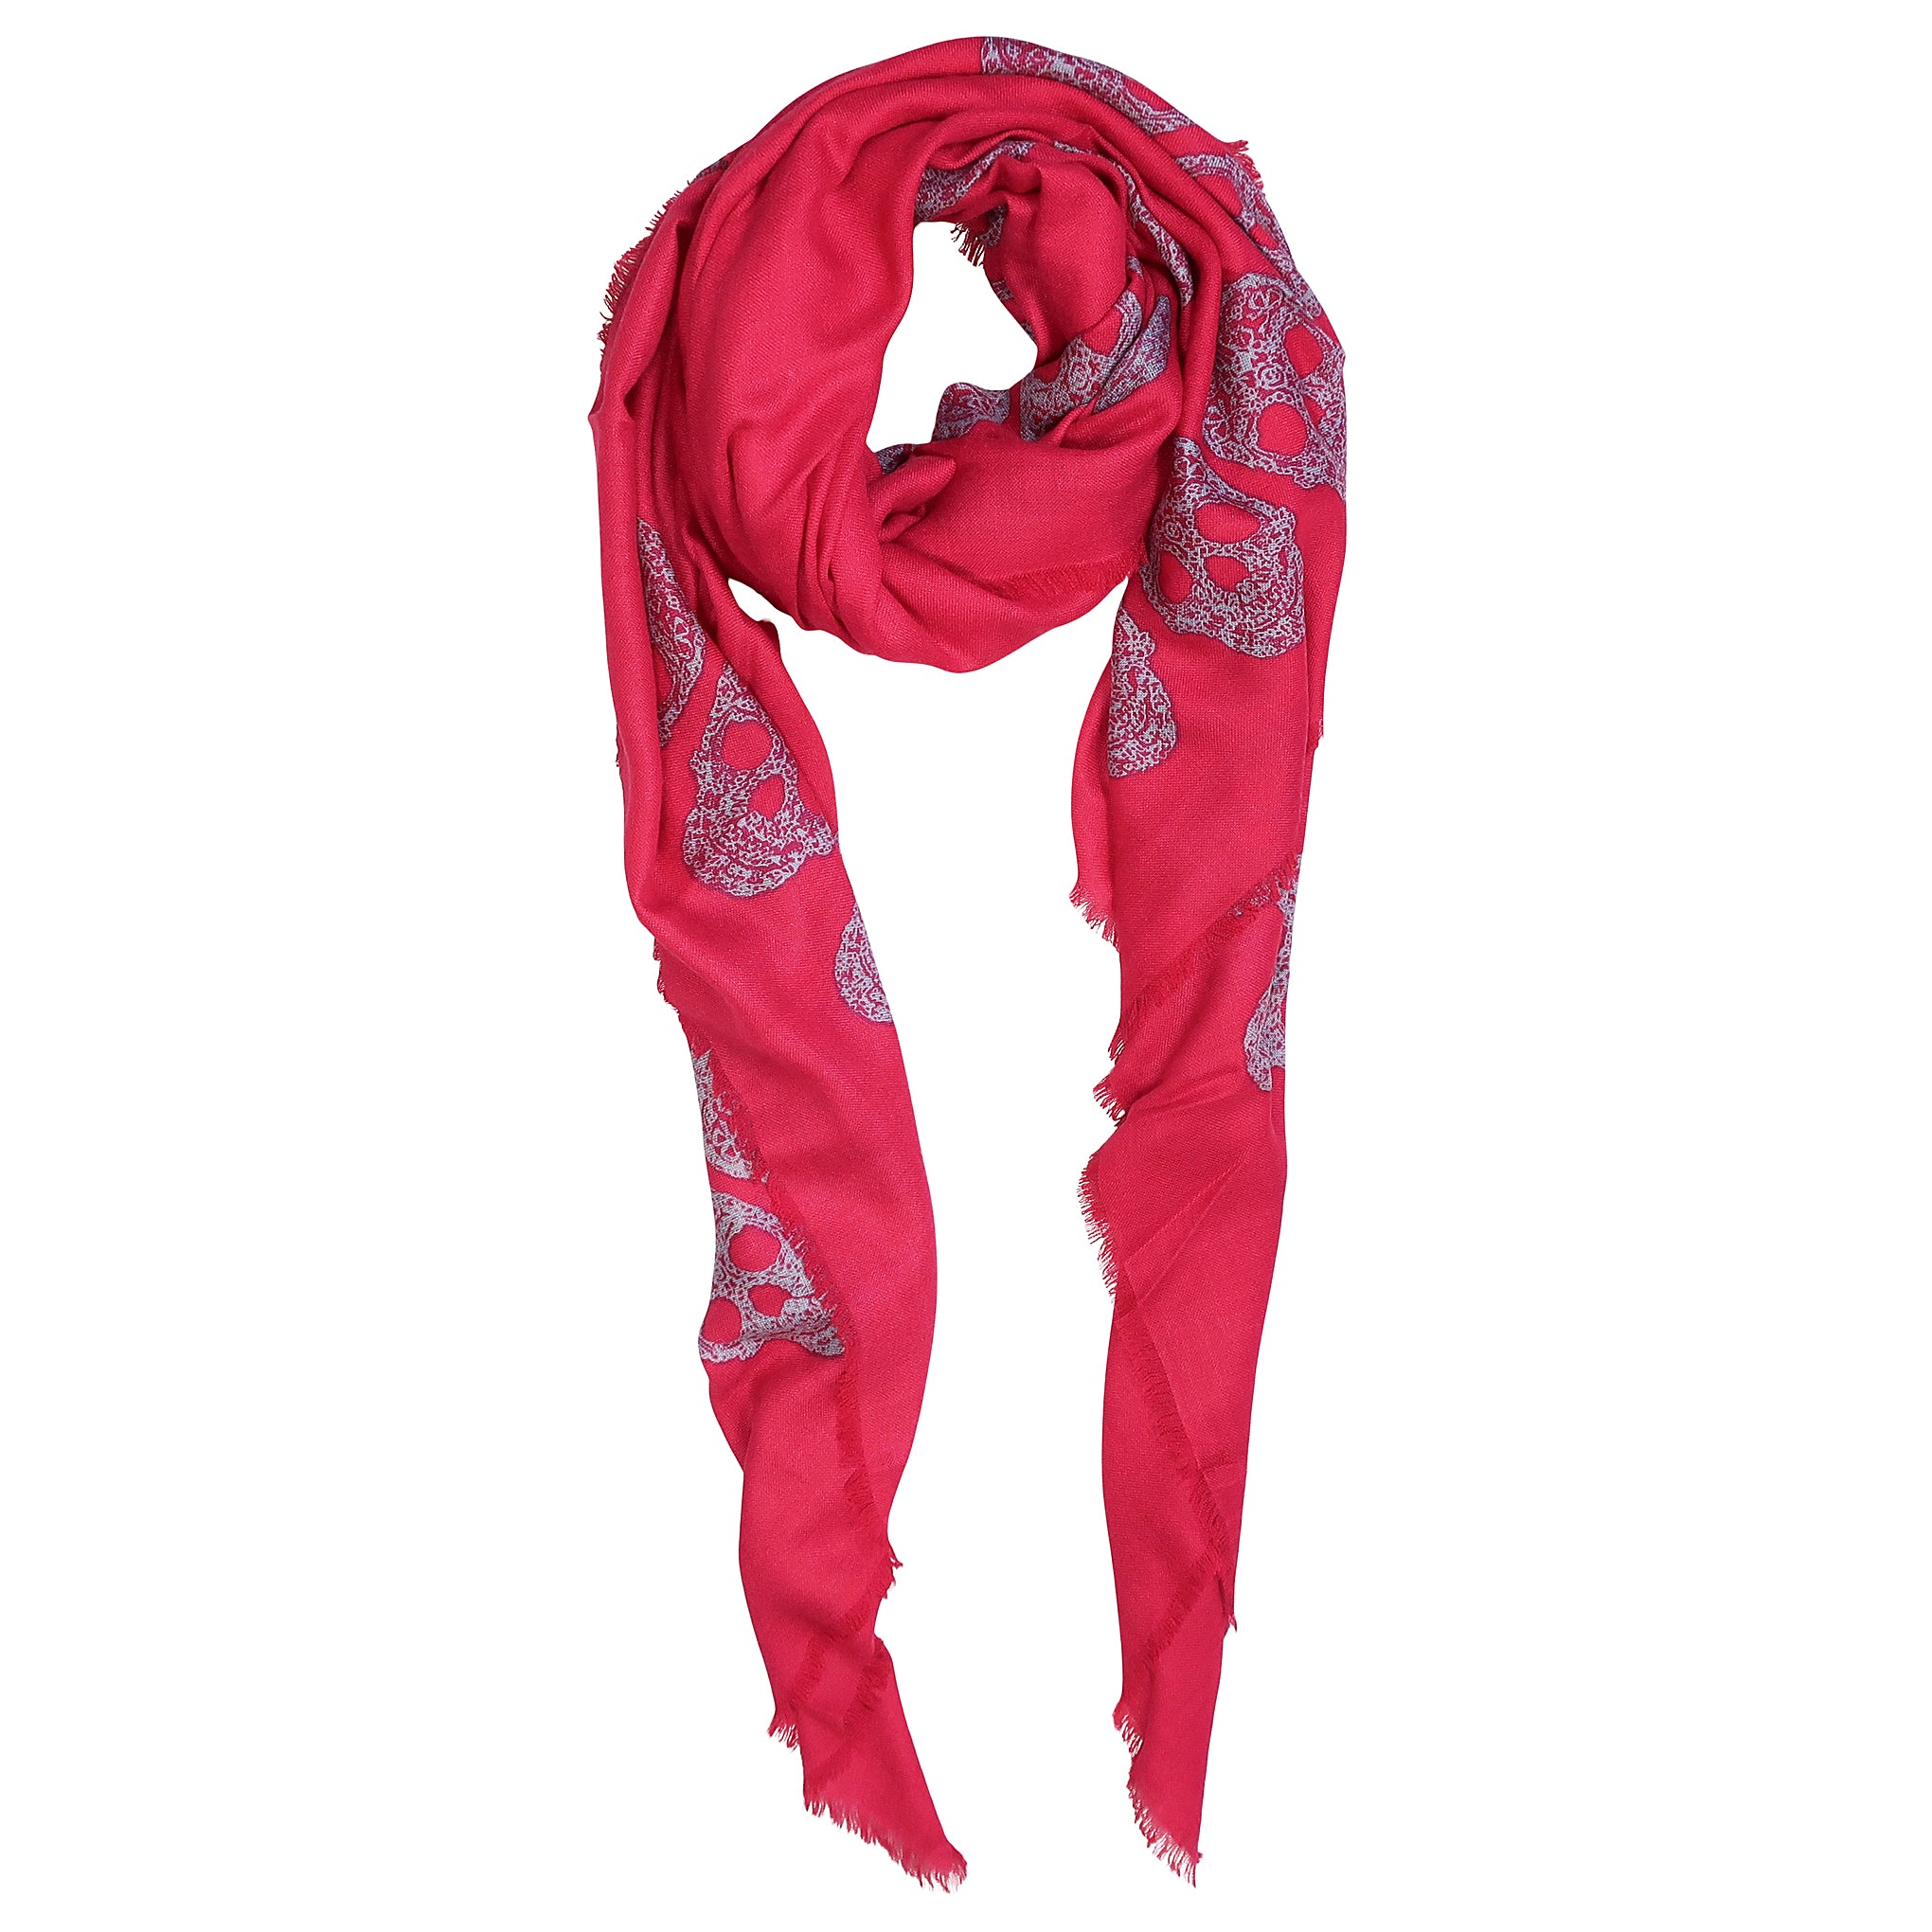 Blue Pacific Frida Skull Bordered Modal and Cashmere Scarf Shawl in Cherry Pink